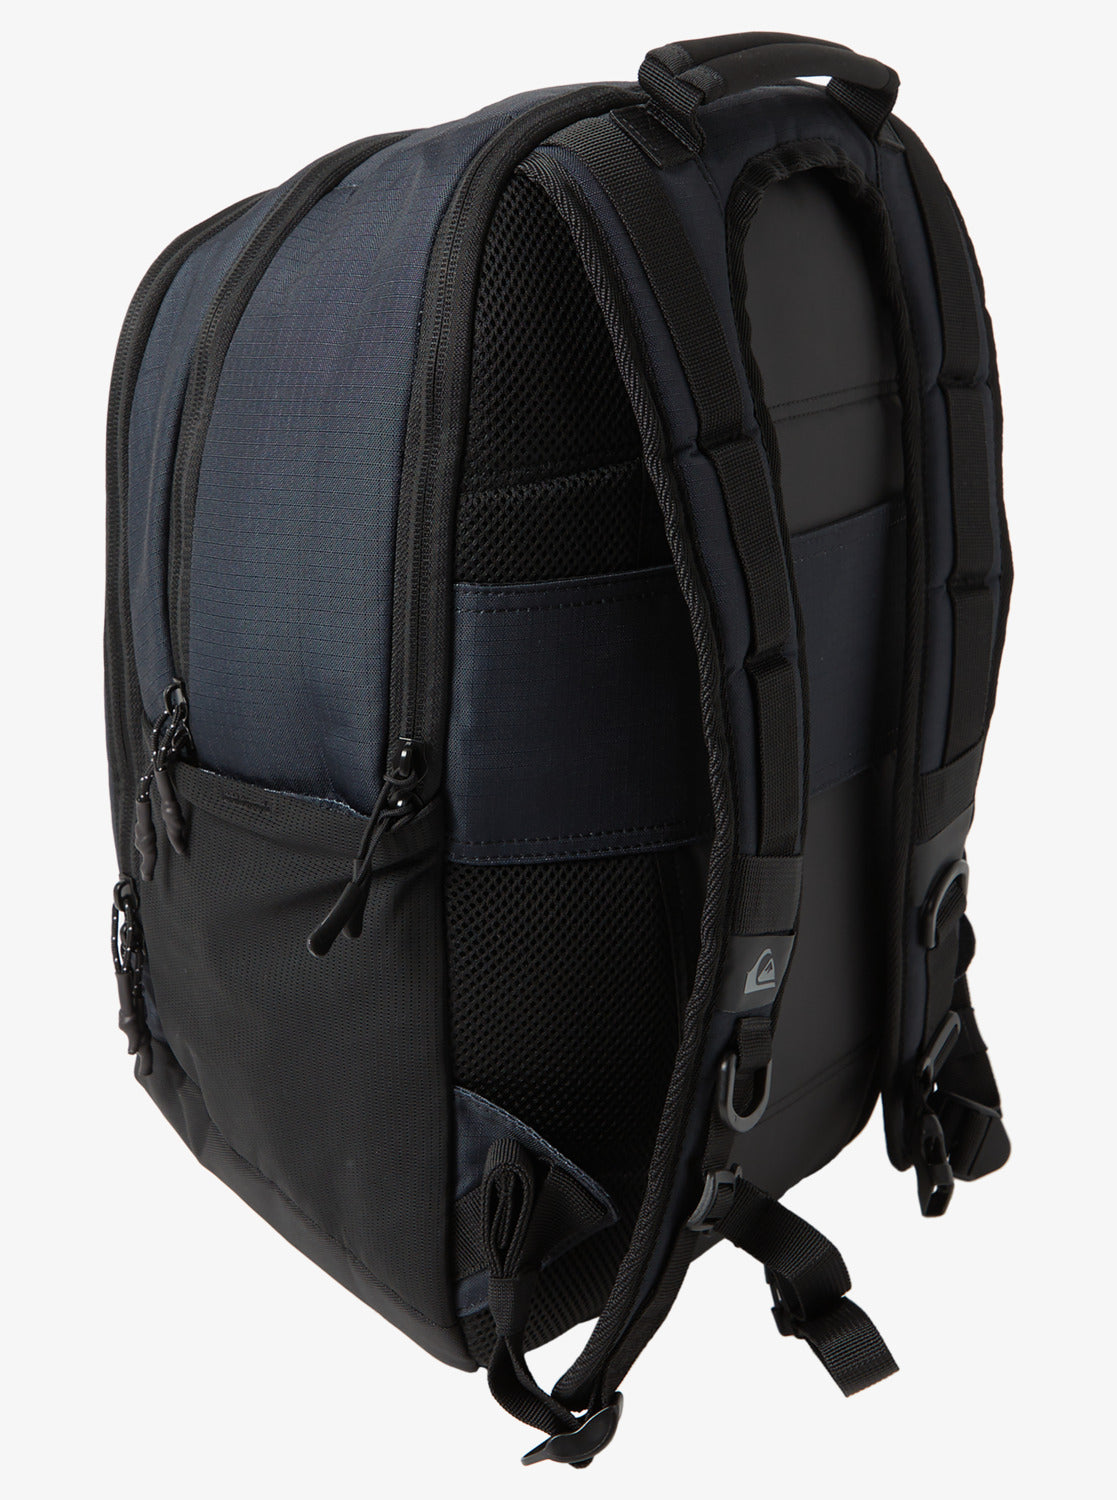 Quiksilver Freeday 28 Litre Backpack Black Colourway Back View